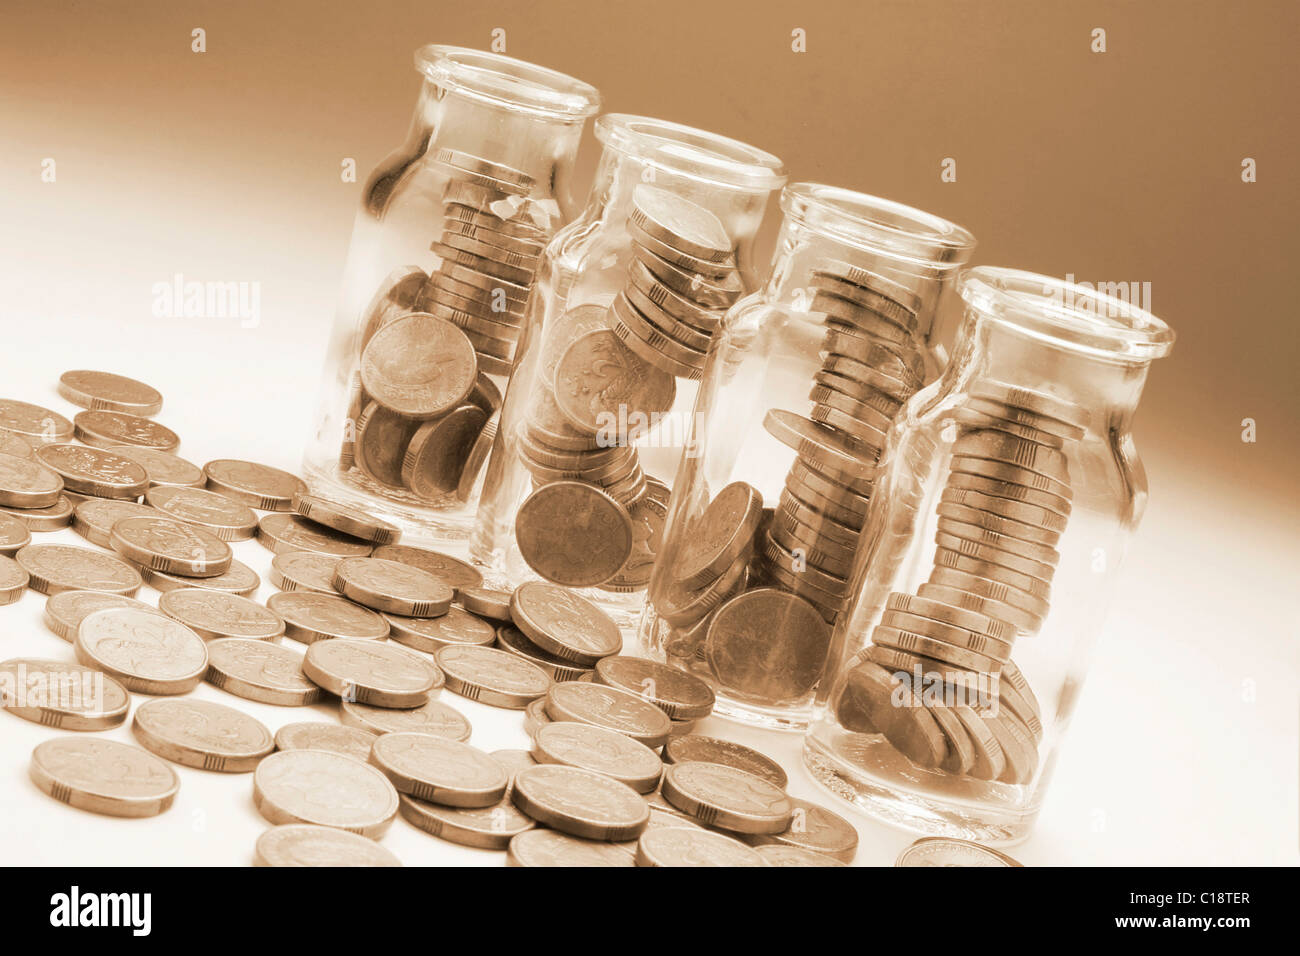 Glass jars full of coins, excess coins aside Stock Photo